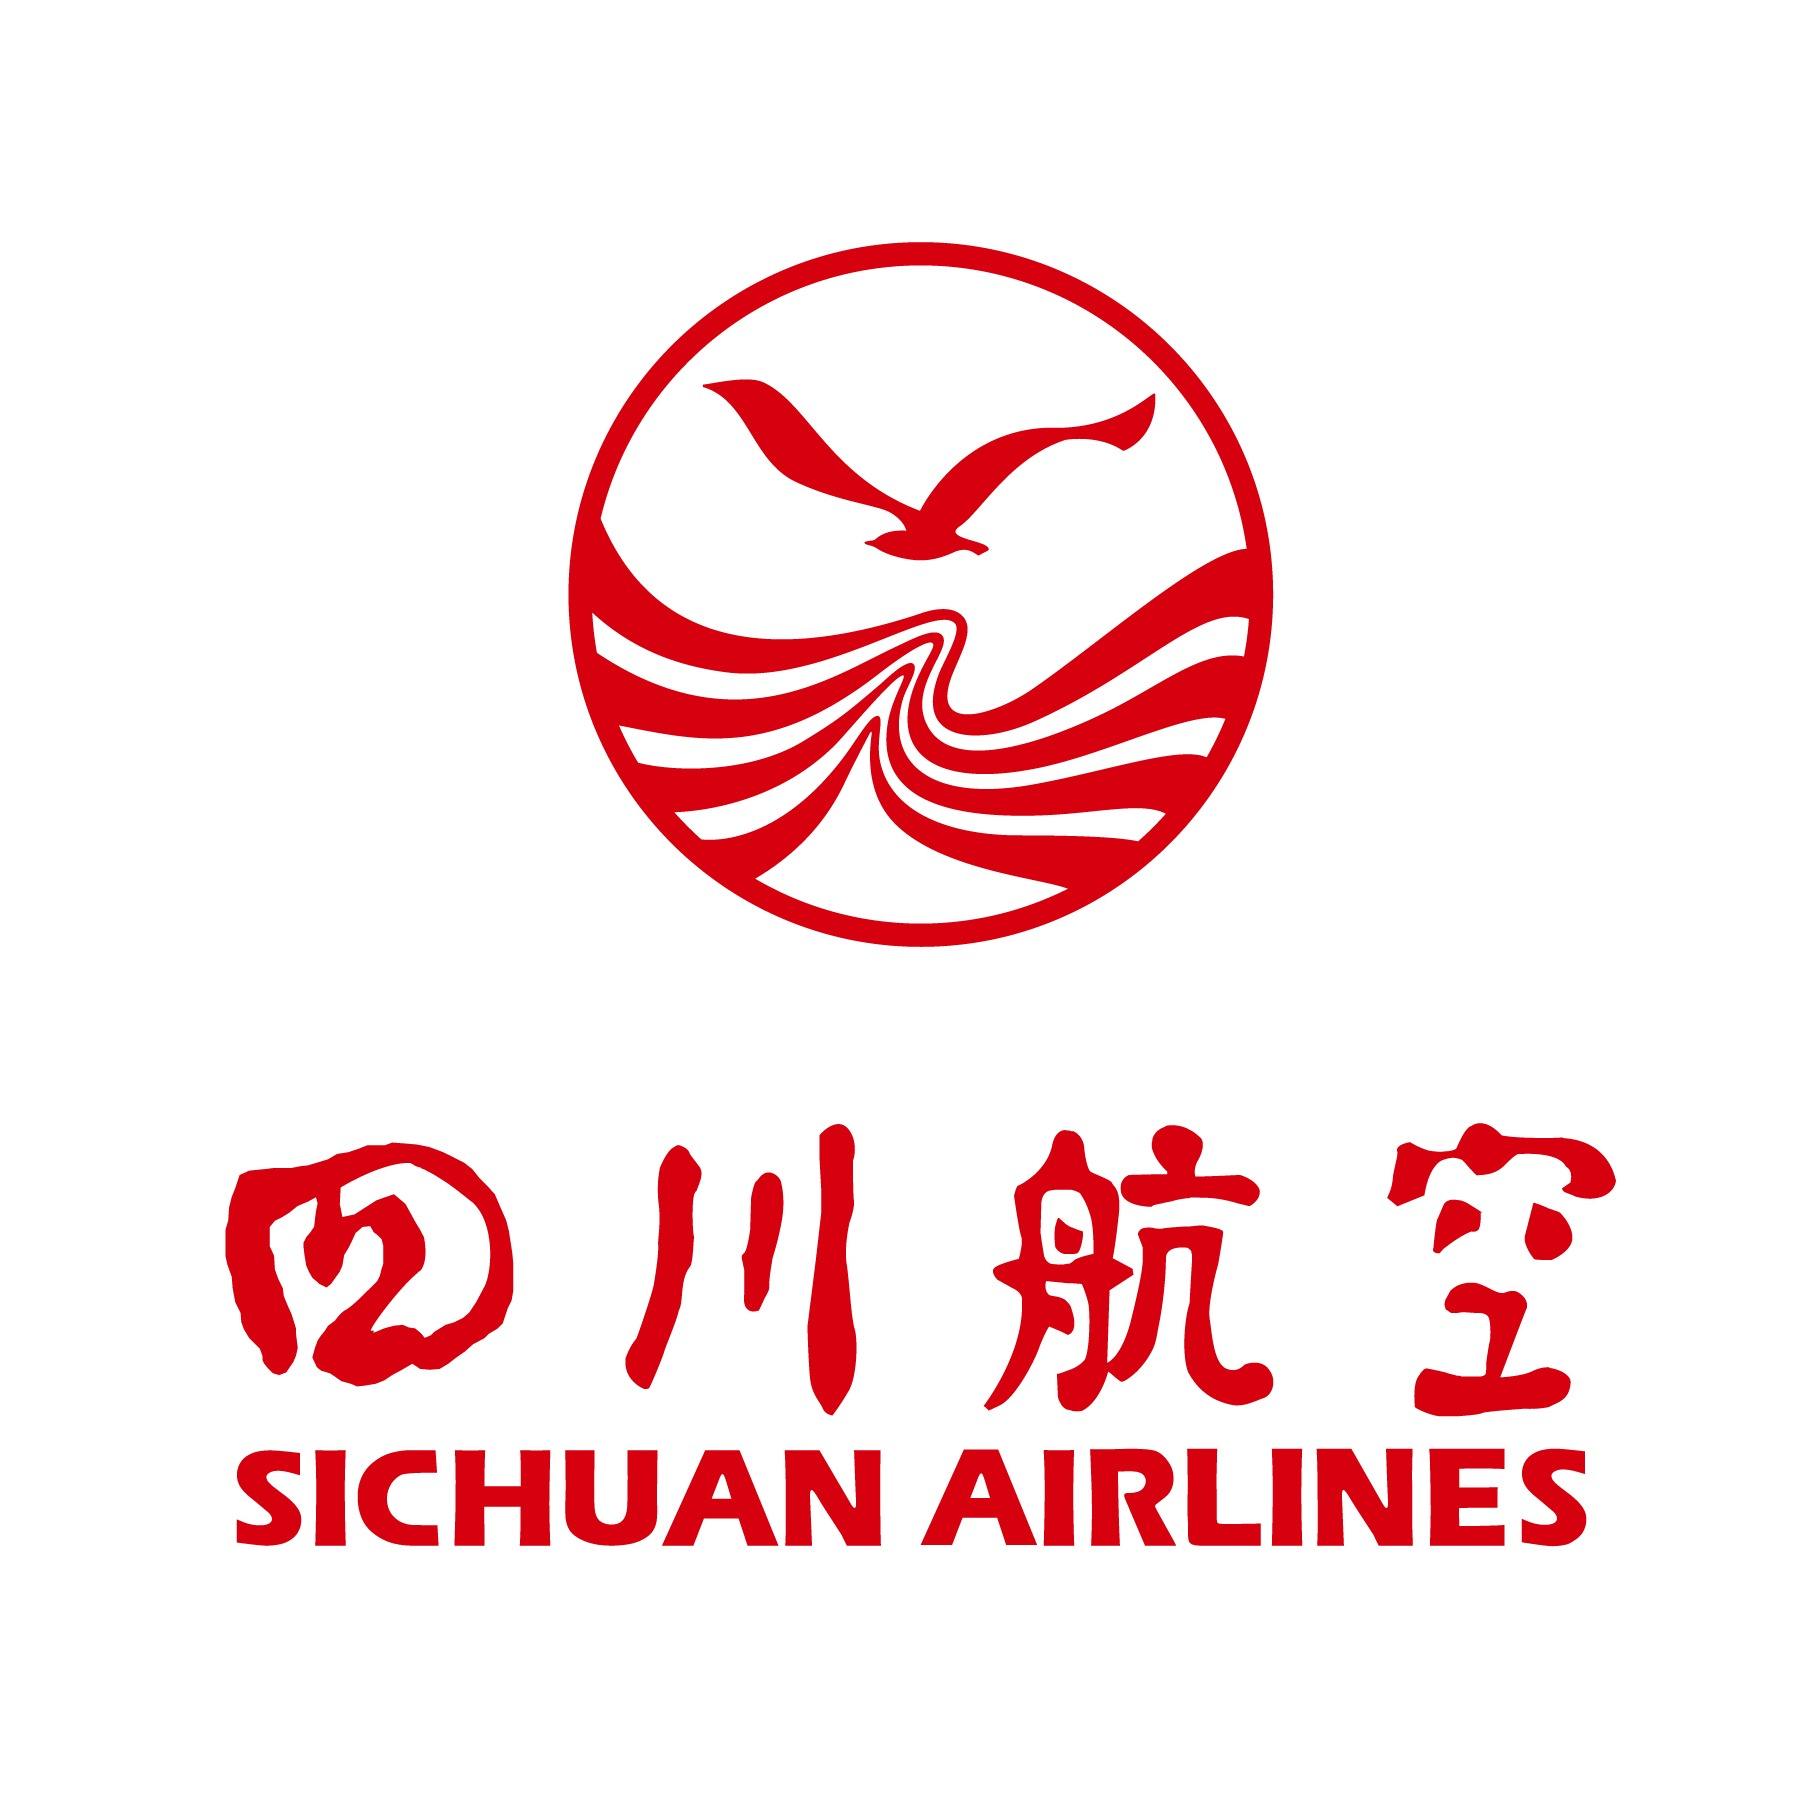 Main route - Sichuan Airlines